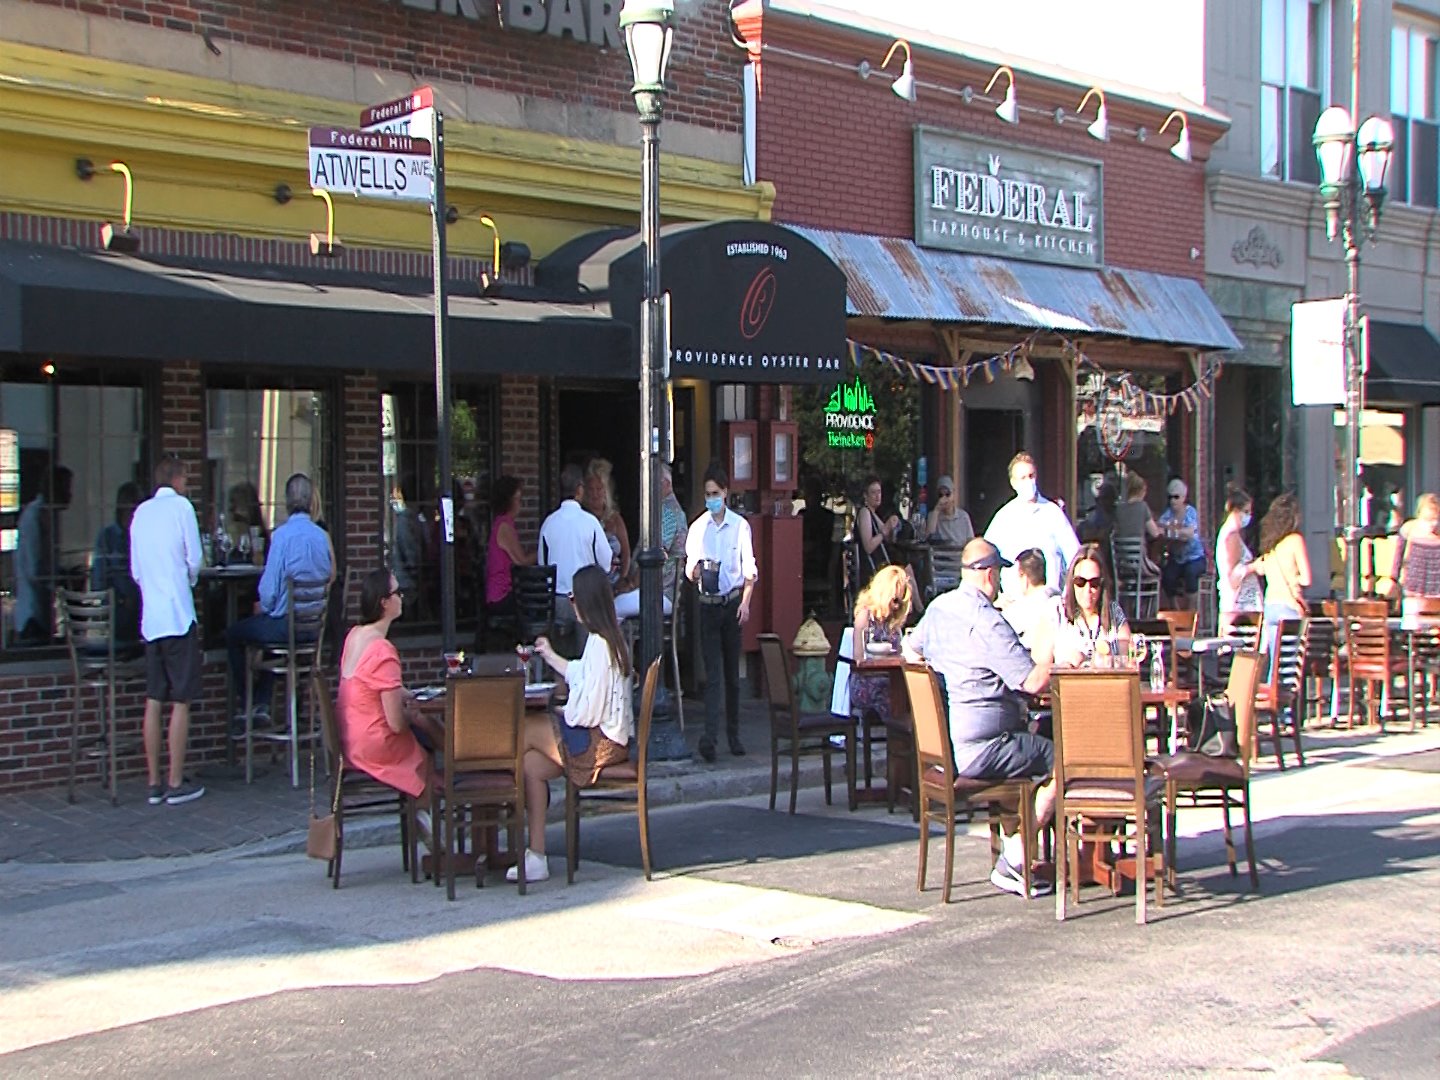 Restaurants spill out into street for first night of Al Fresco dining